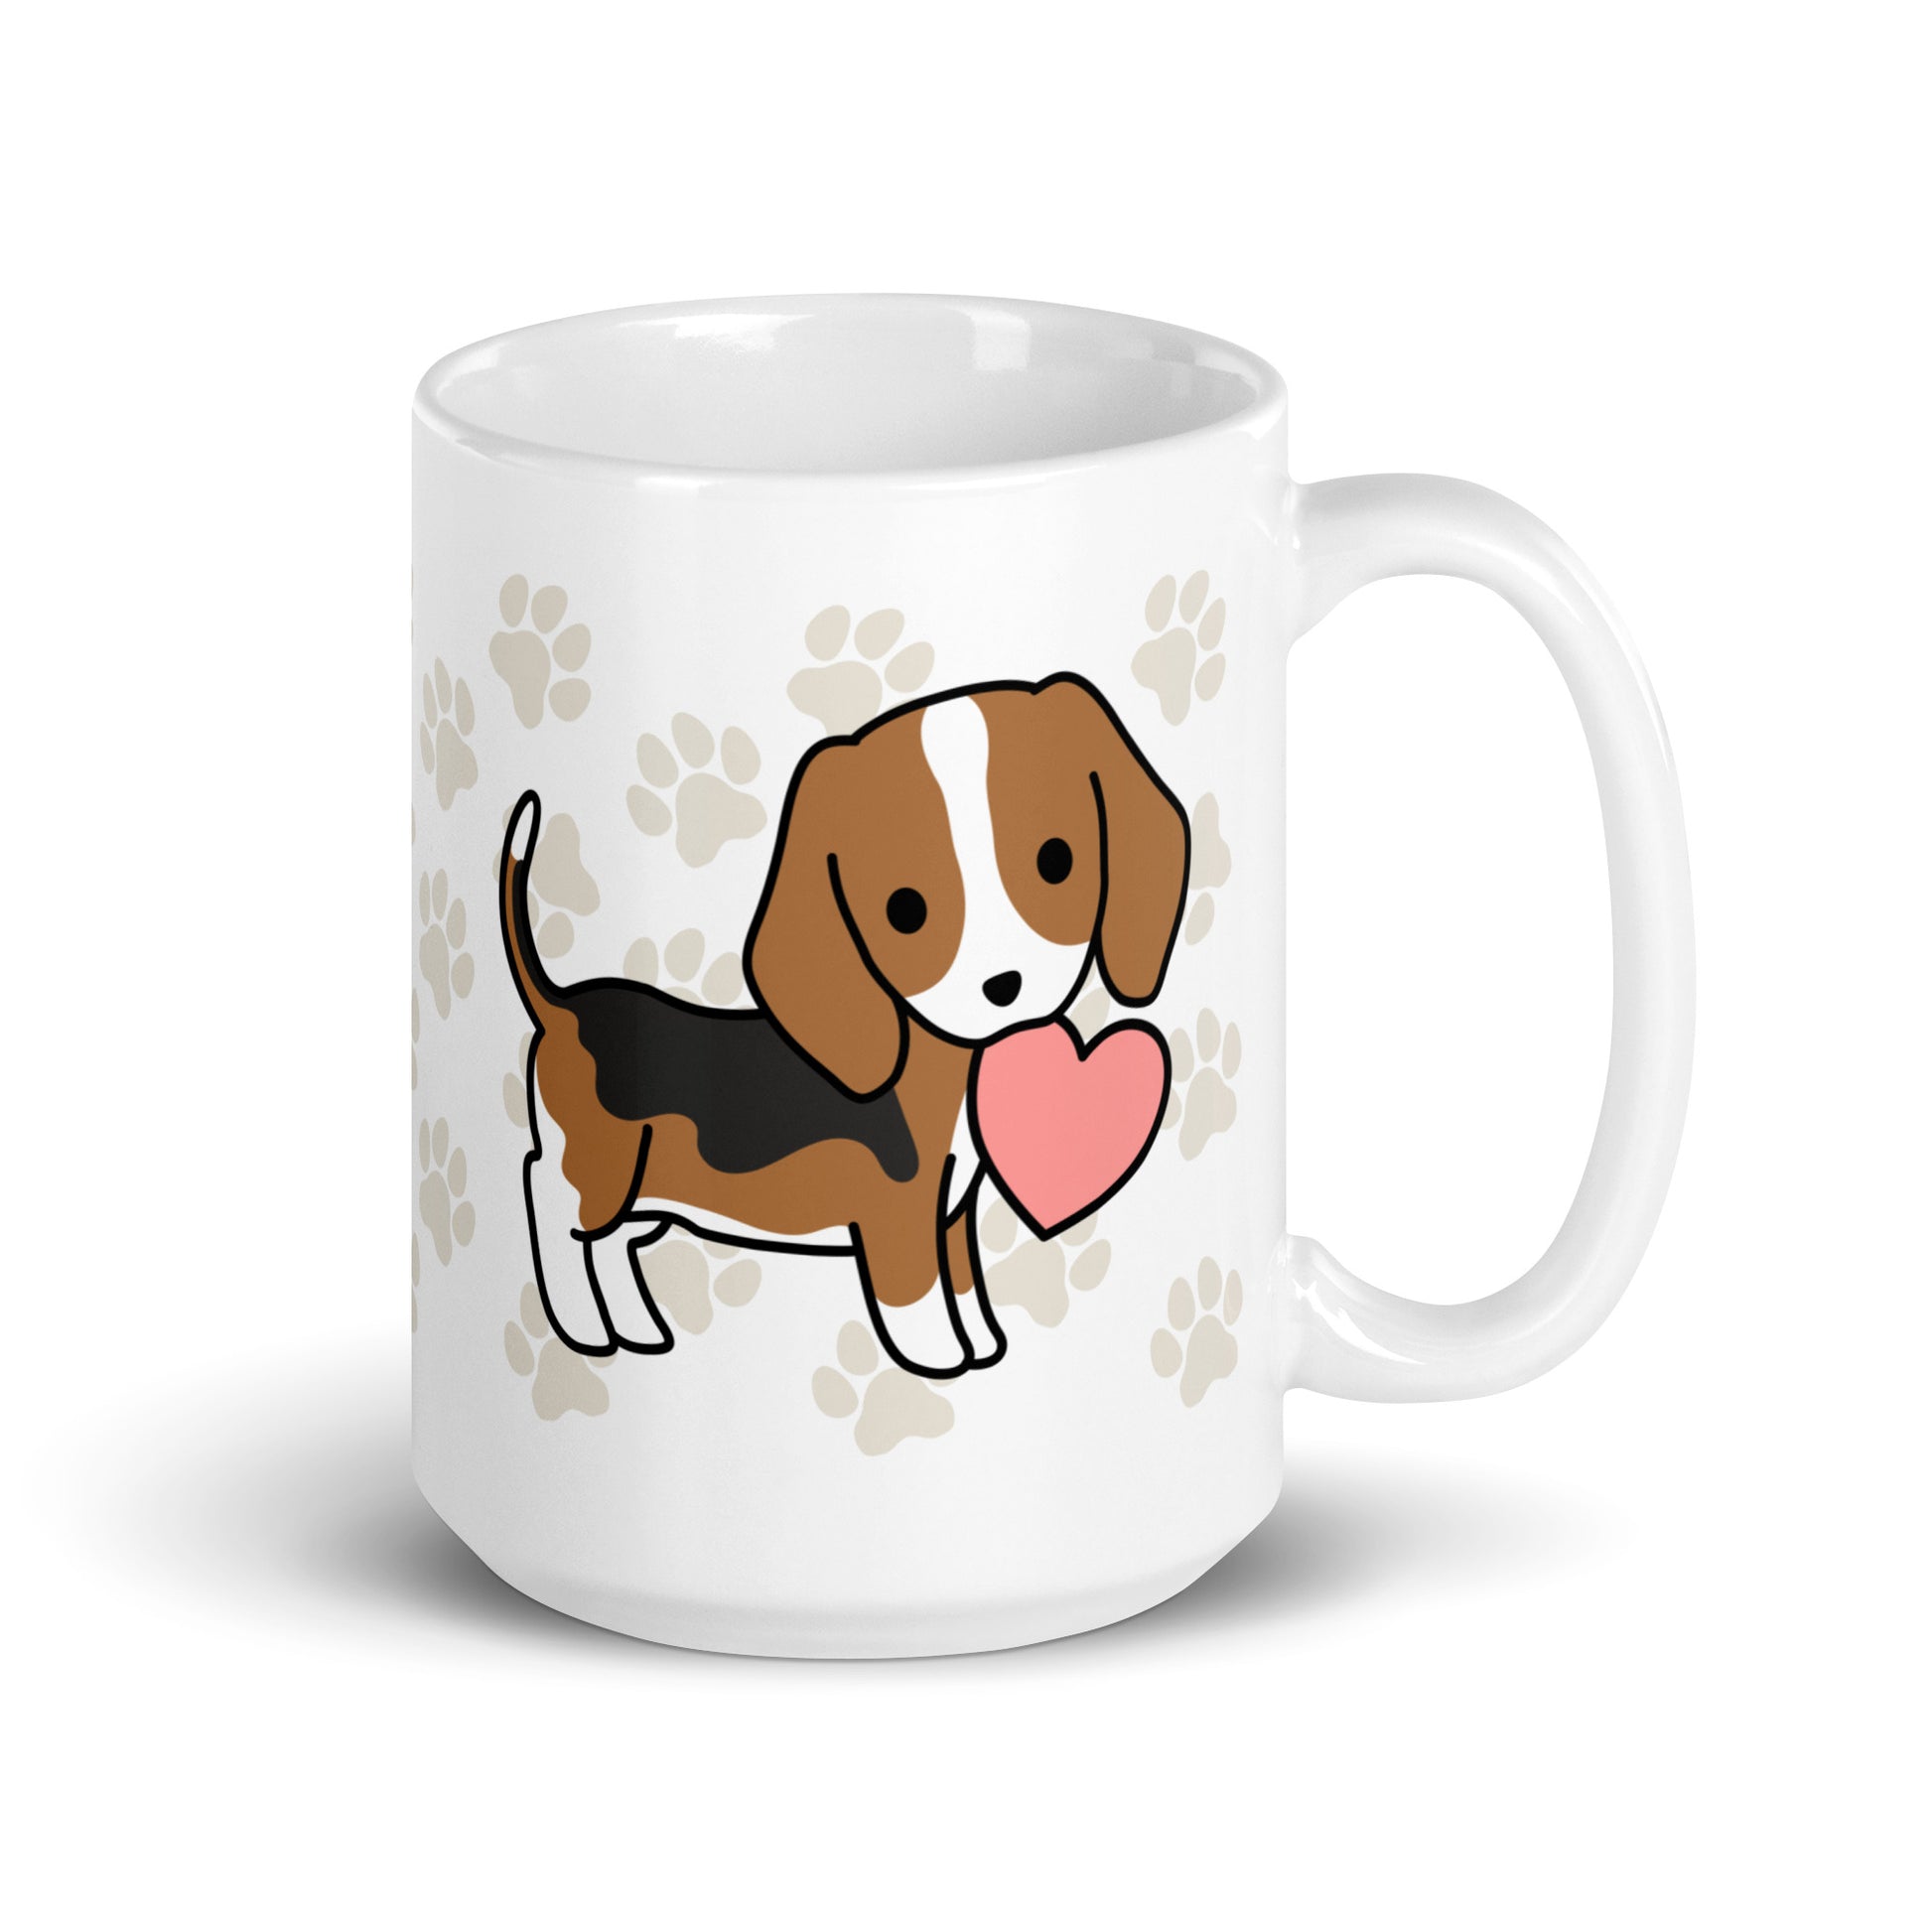 A white 15 ounce ceramic mug with a pattern of light brown pawprints all over. The mug also features a stylized illustration of a Beagle holding a heart in its mouth.